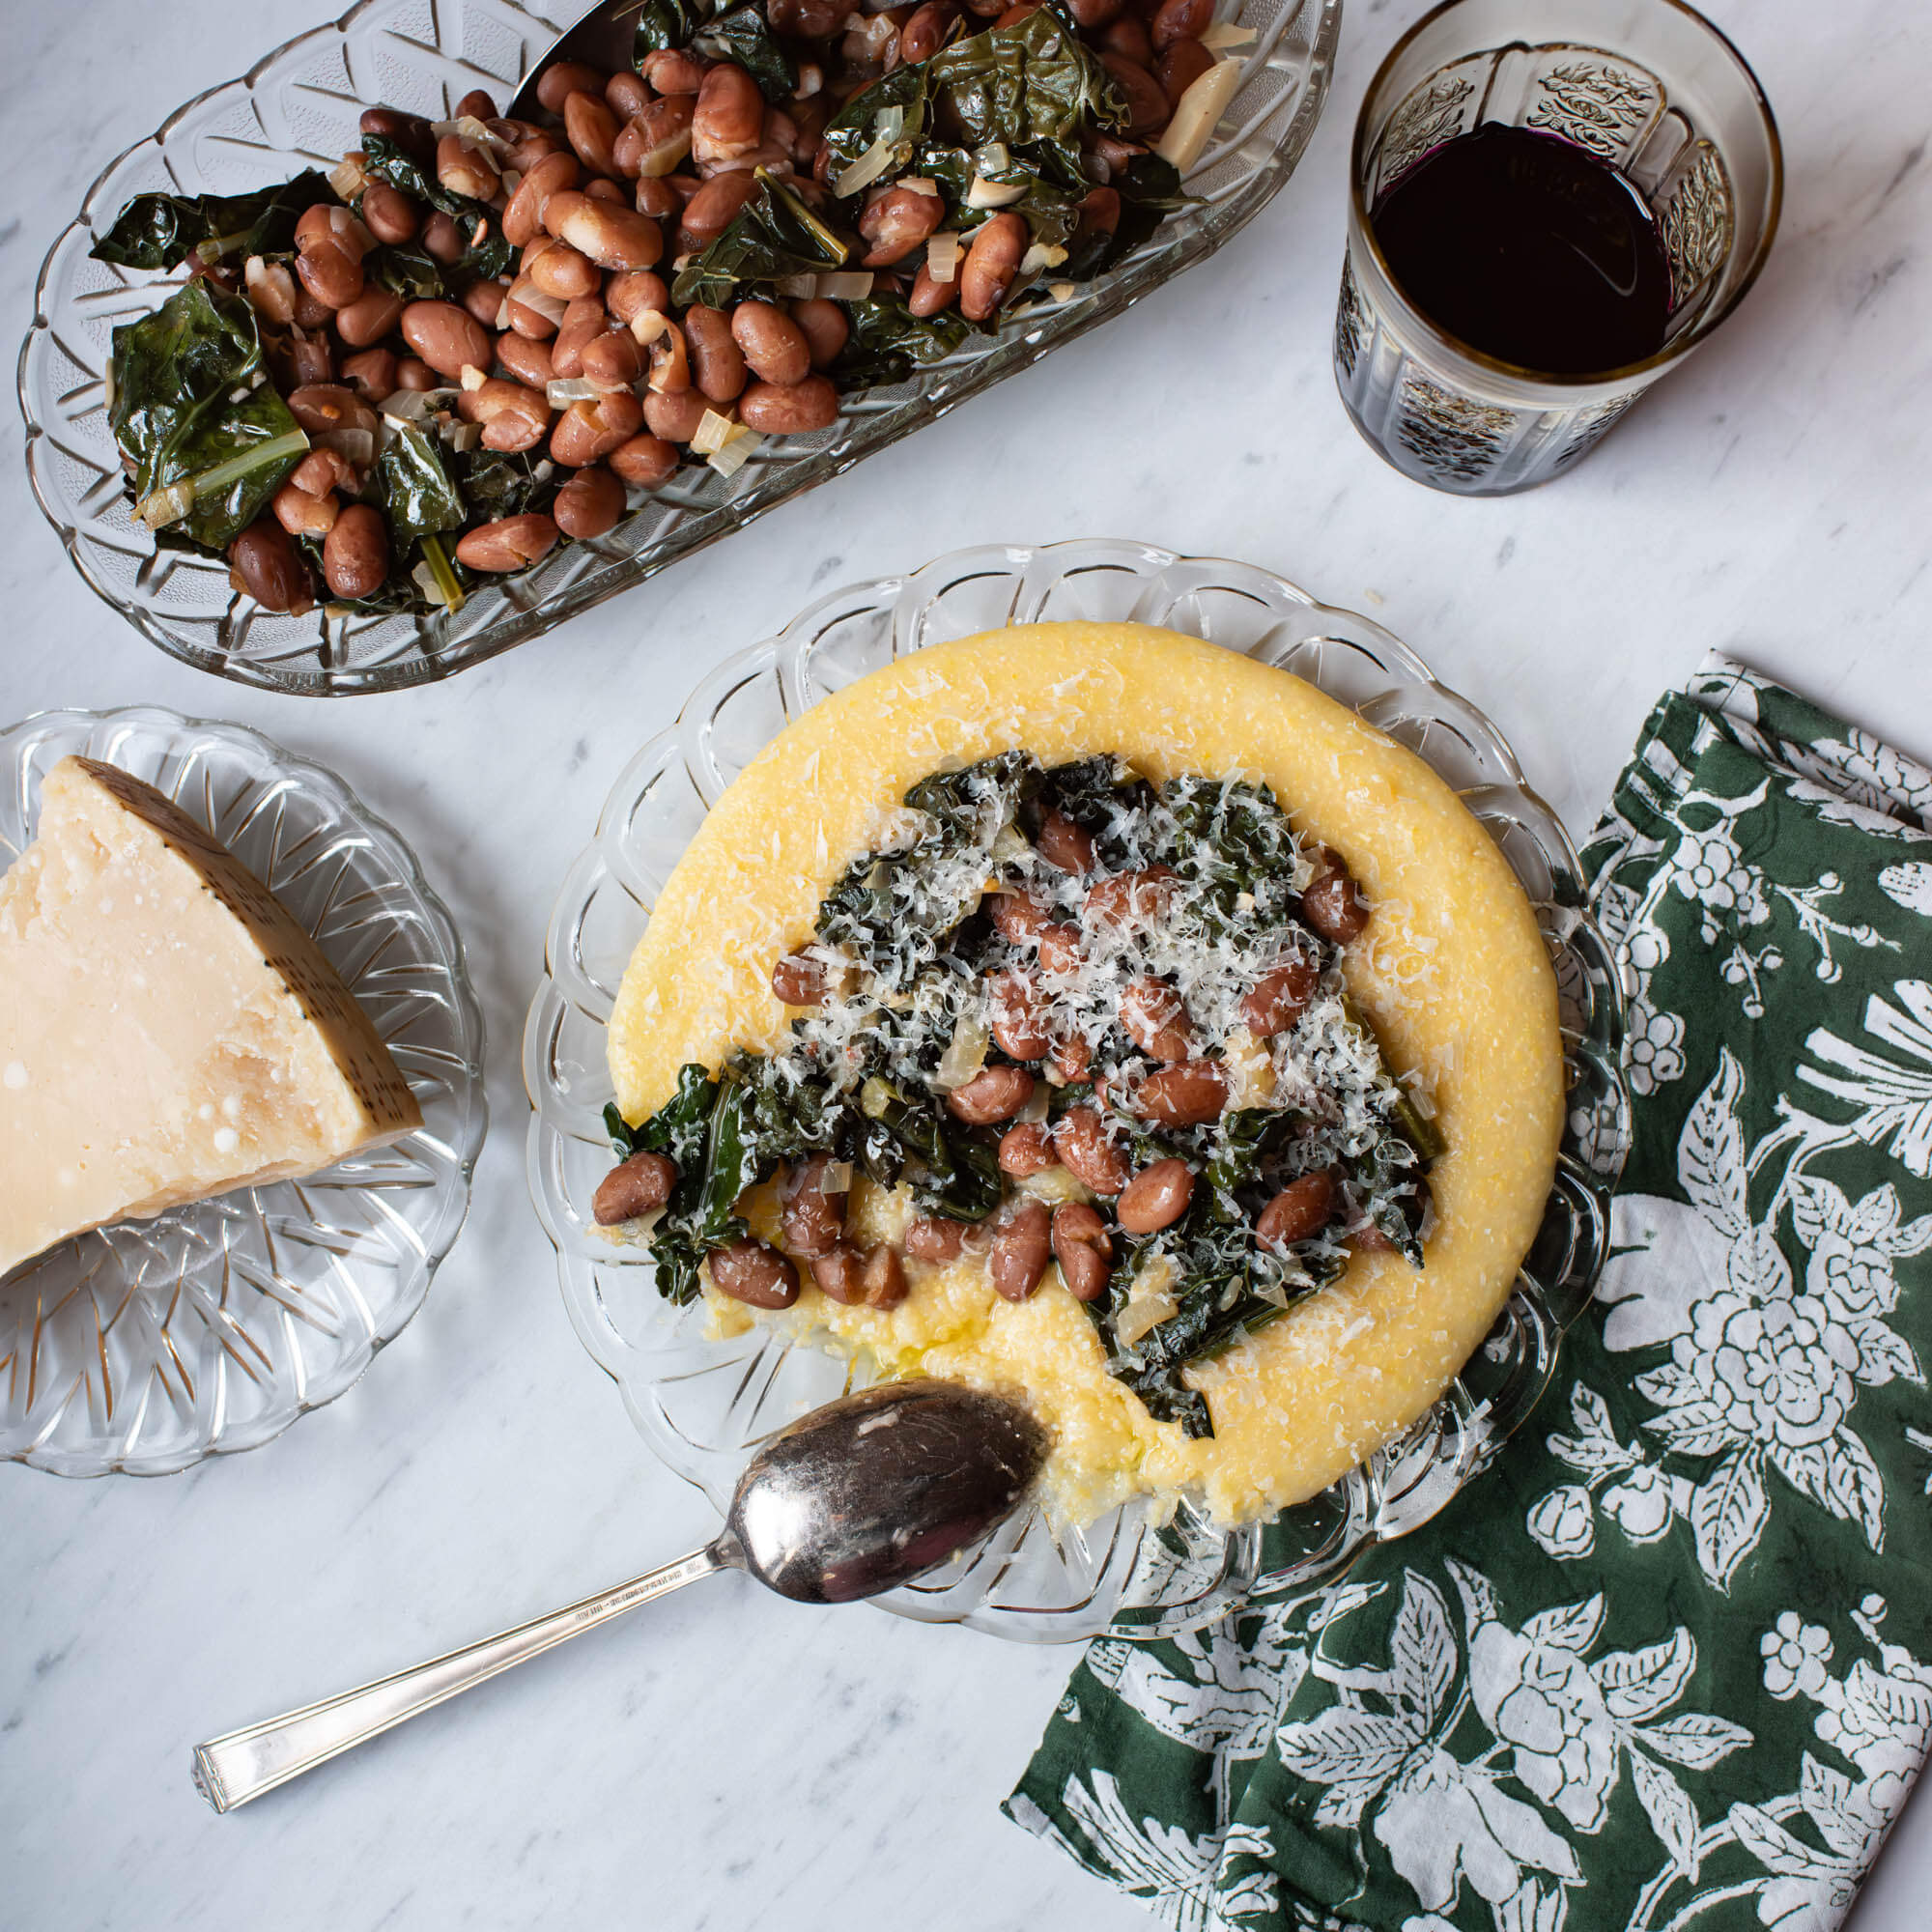 Italian-style beans and greens with Primary Beans Cranberry beans